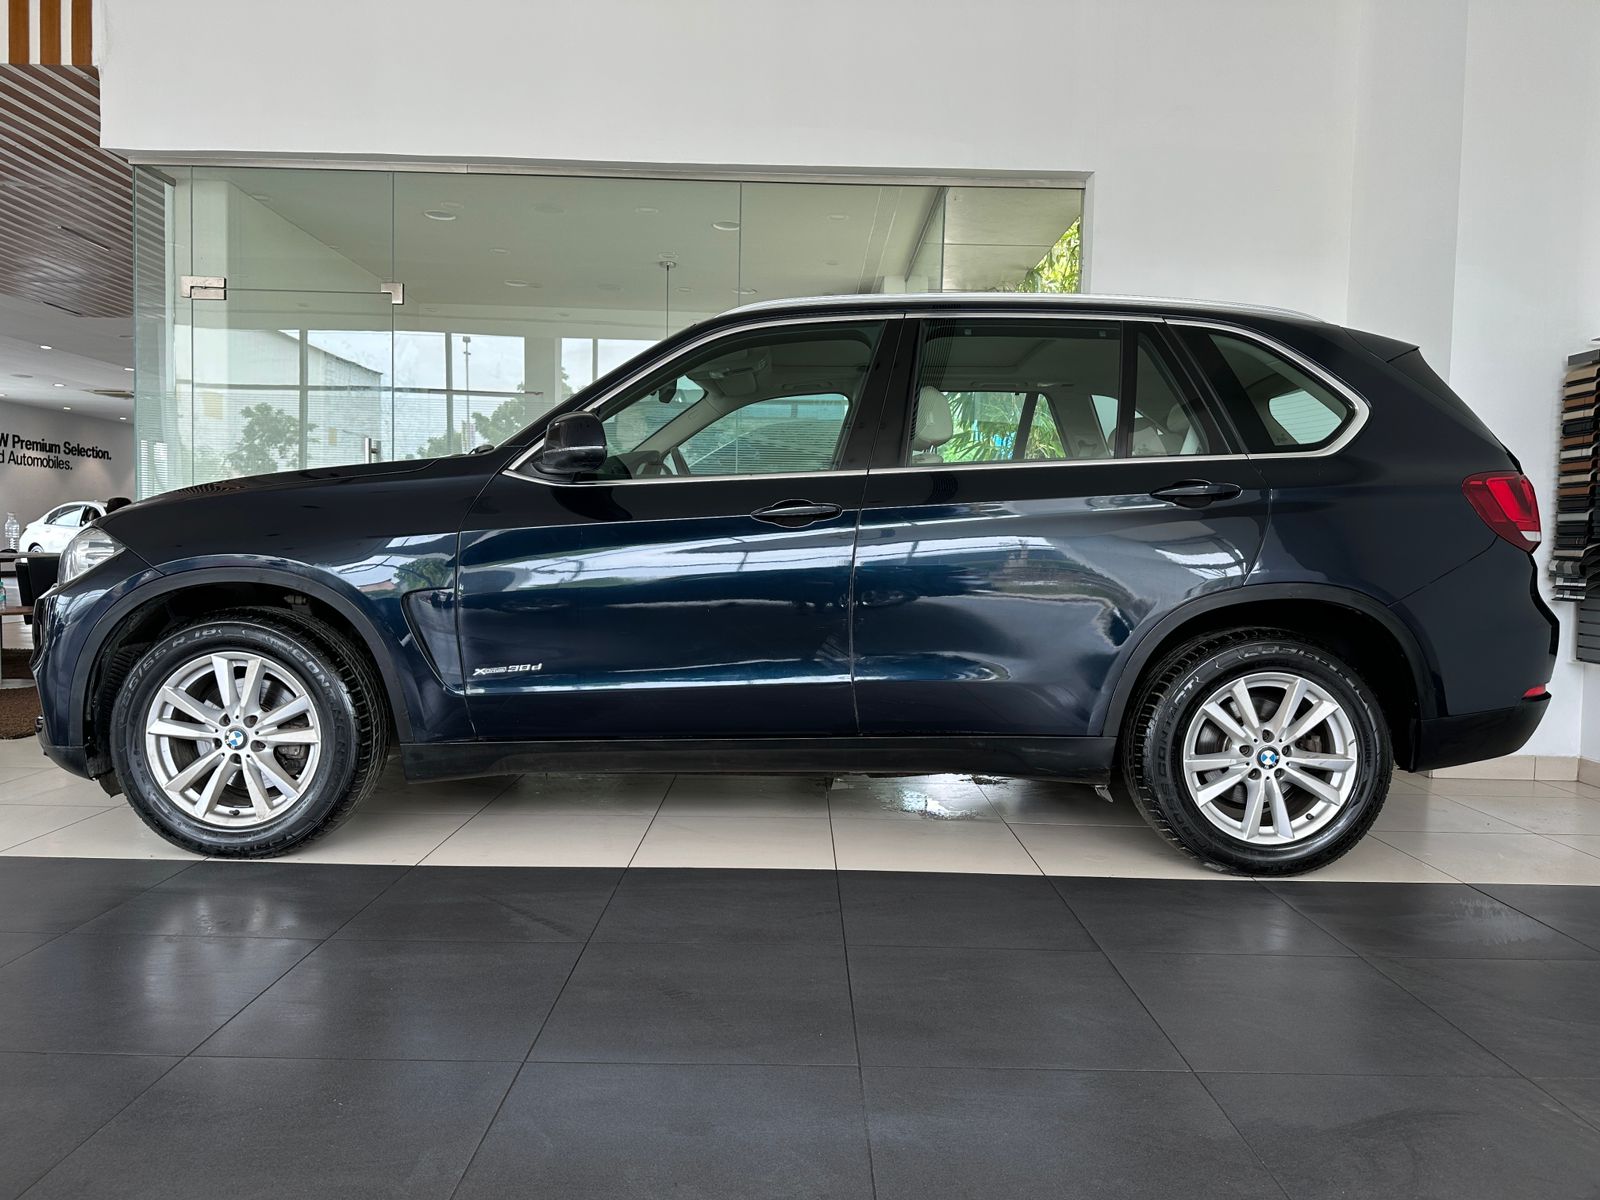 BMW X5 - 2015 model - 91439 kms right